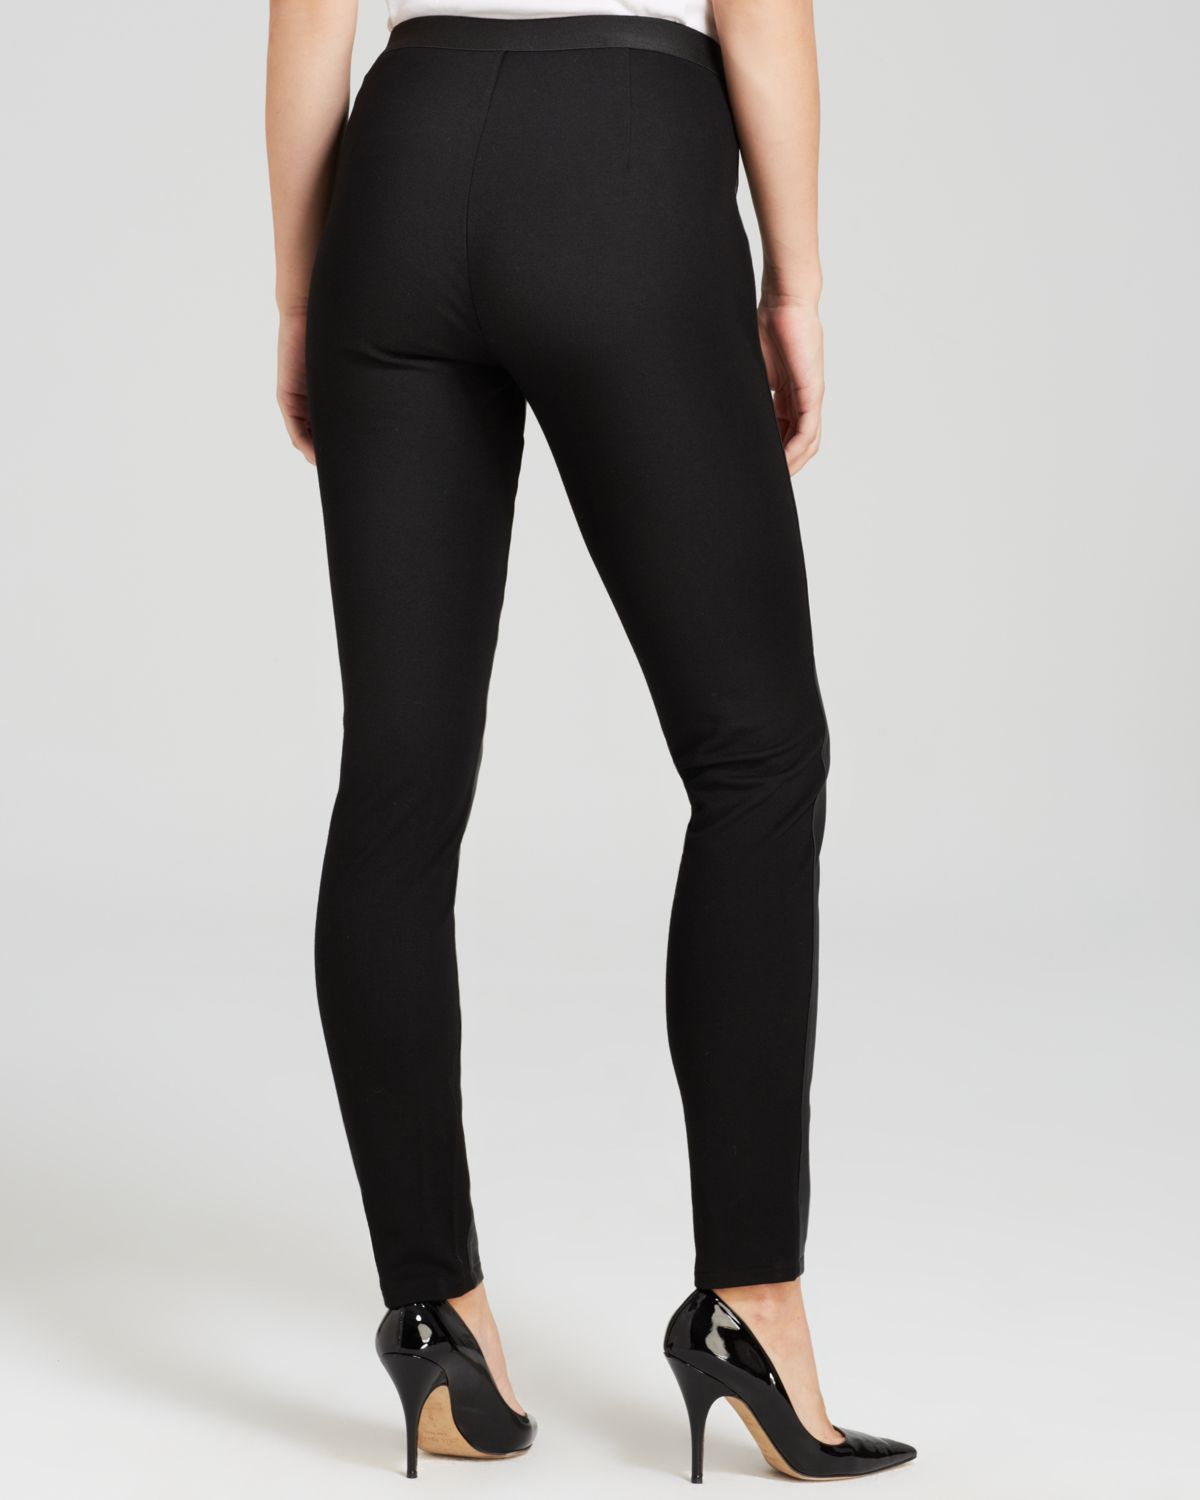 Download Lyst - Eileen Fisher Leather Front Leggings in Black